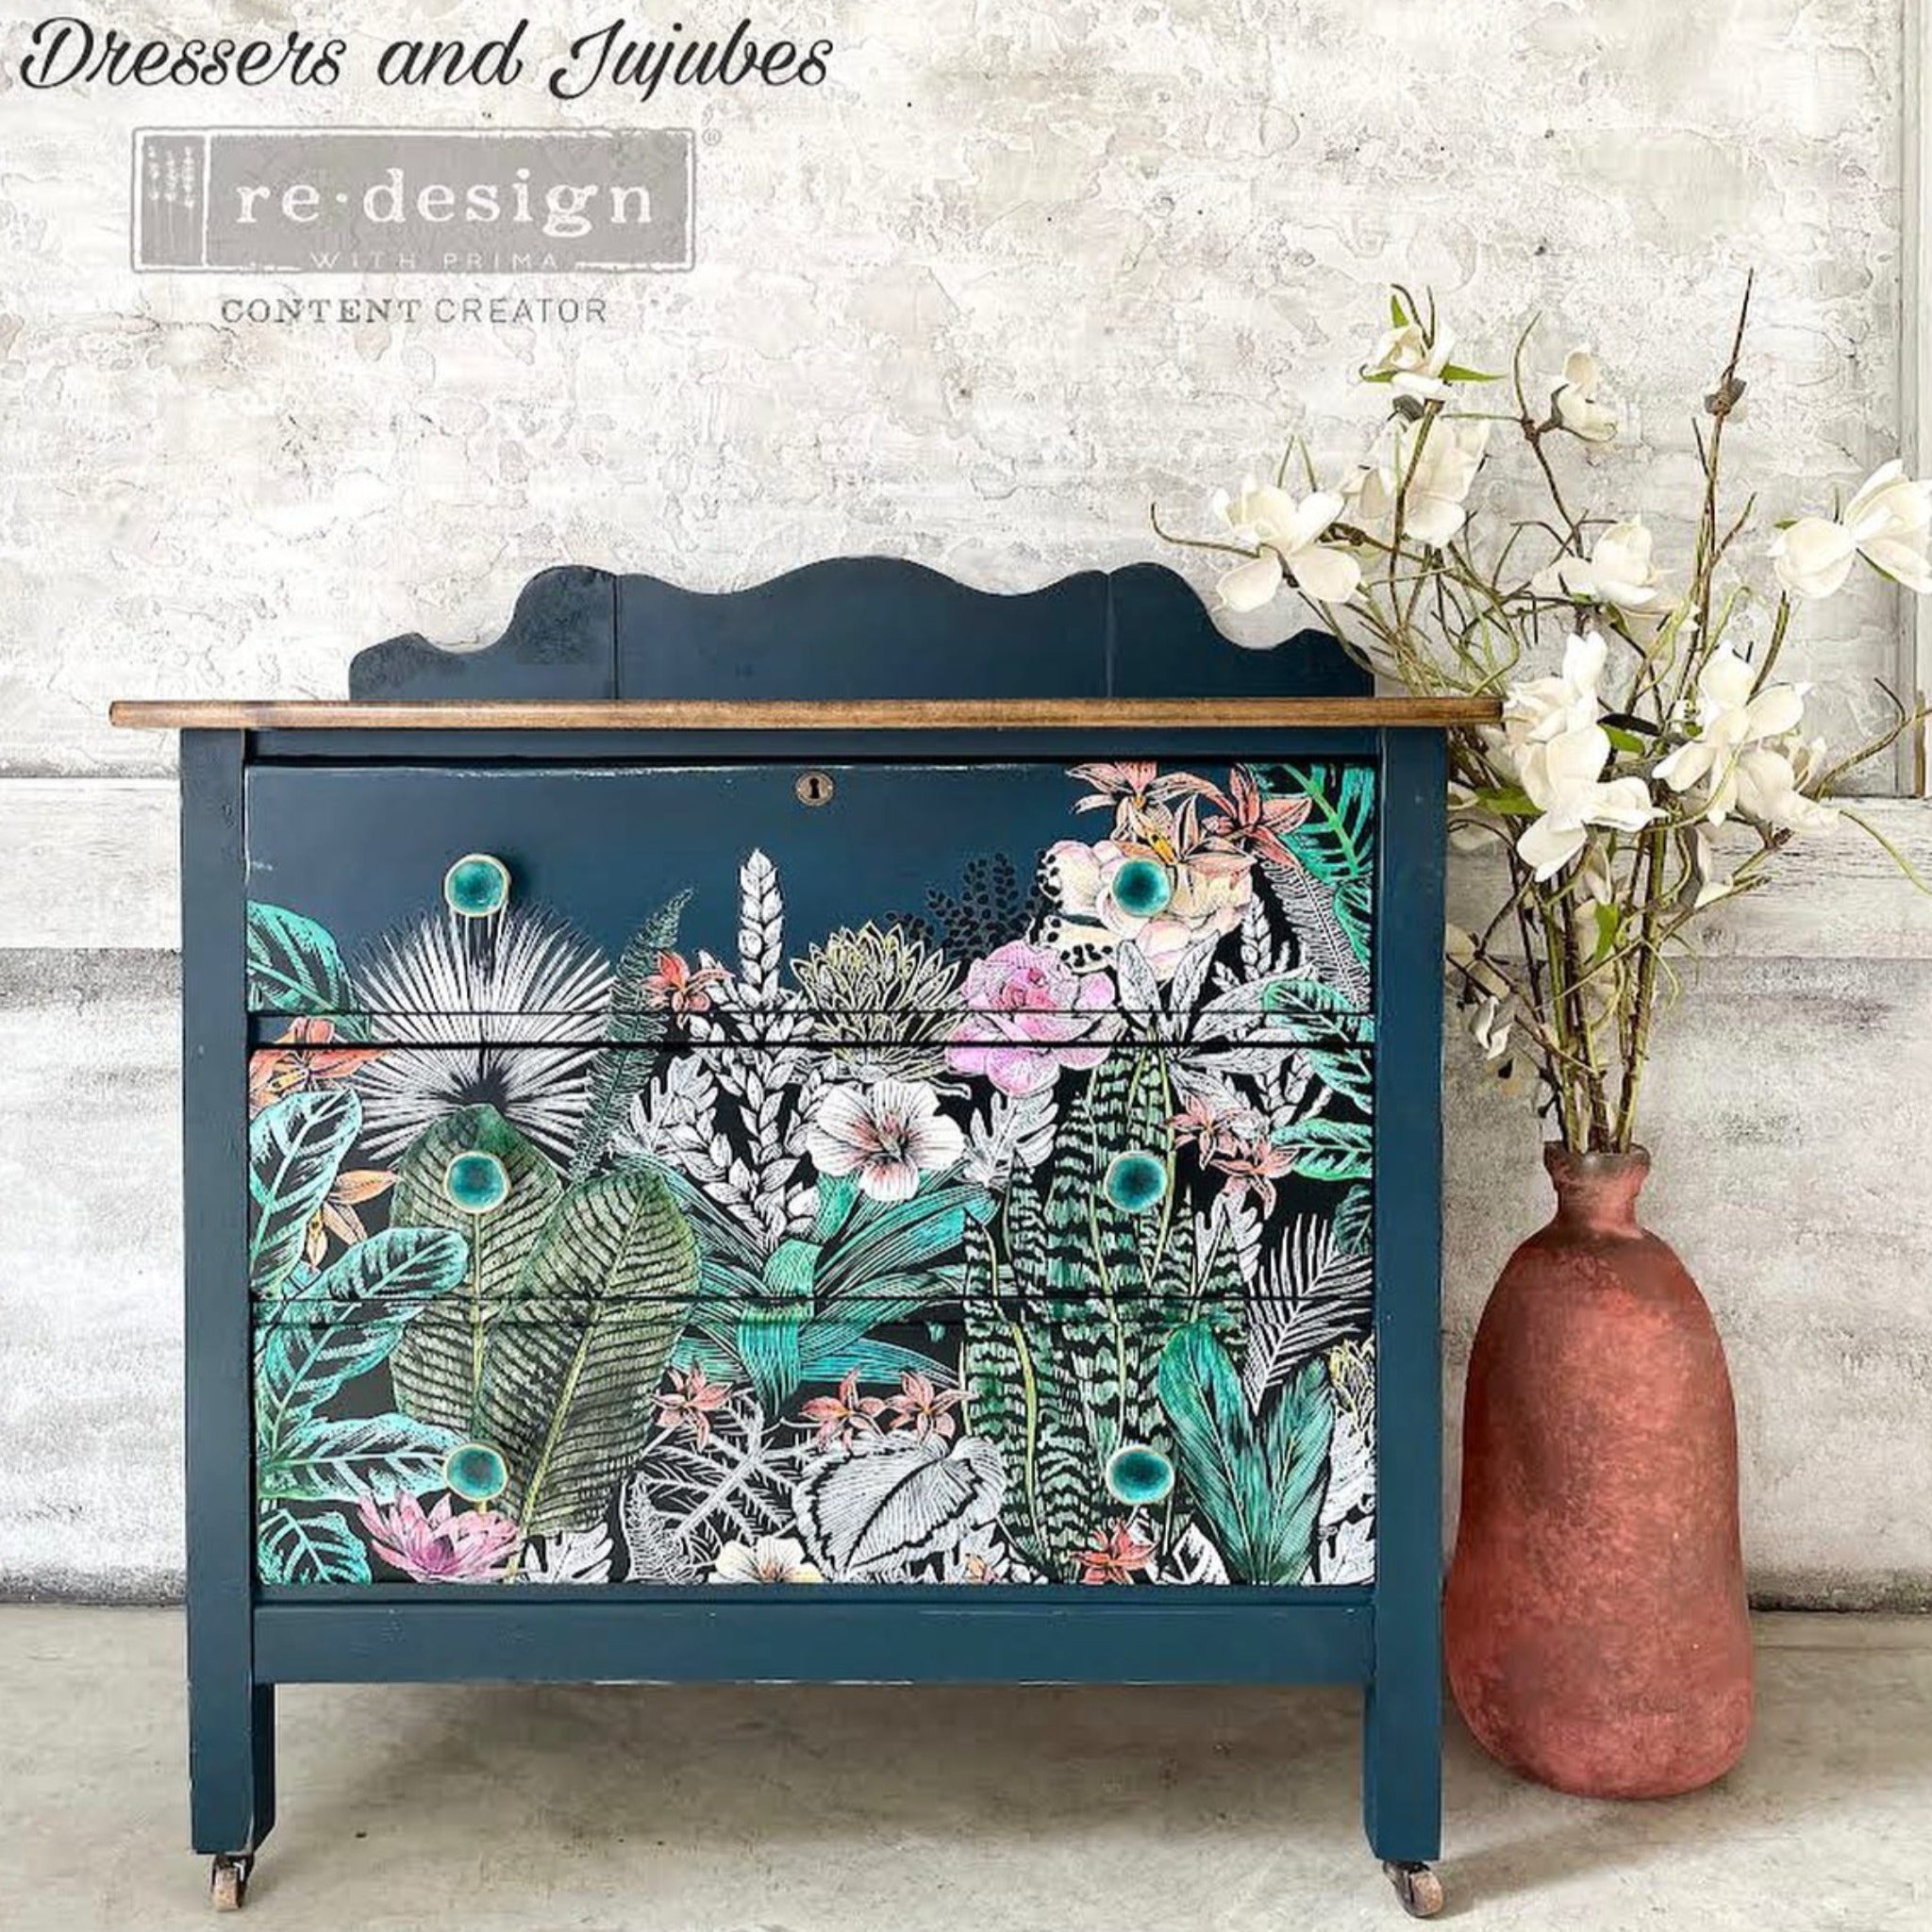 A vintage dresser refurbished by Dressers & Jujubes is painted blue and features a hand-painted colorful version of ReDesign with Prima's Abstract Jungle transfer on its 3 drawers.